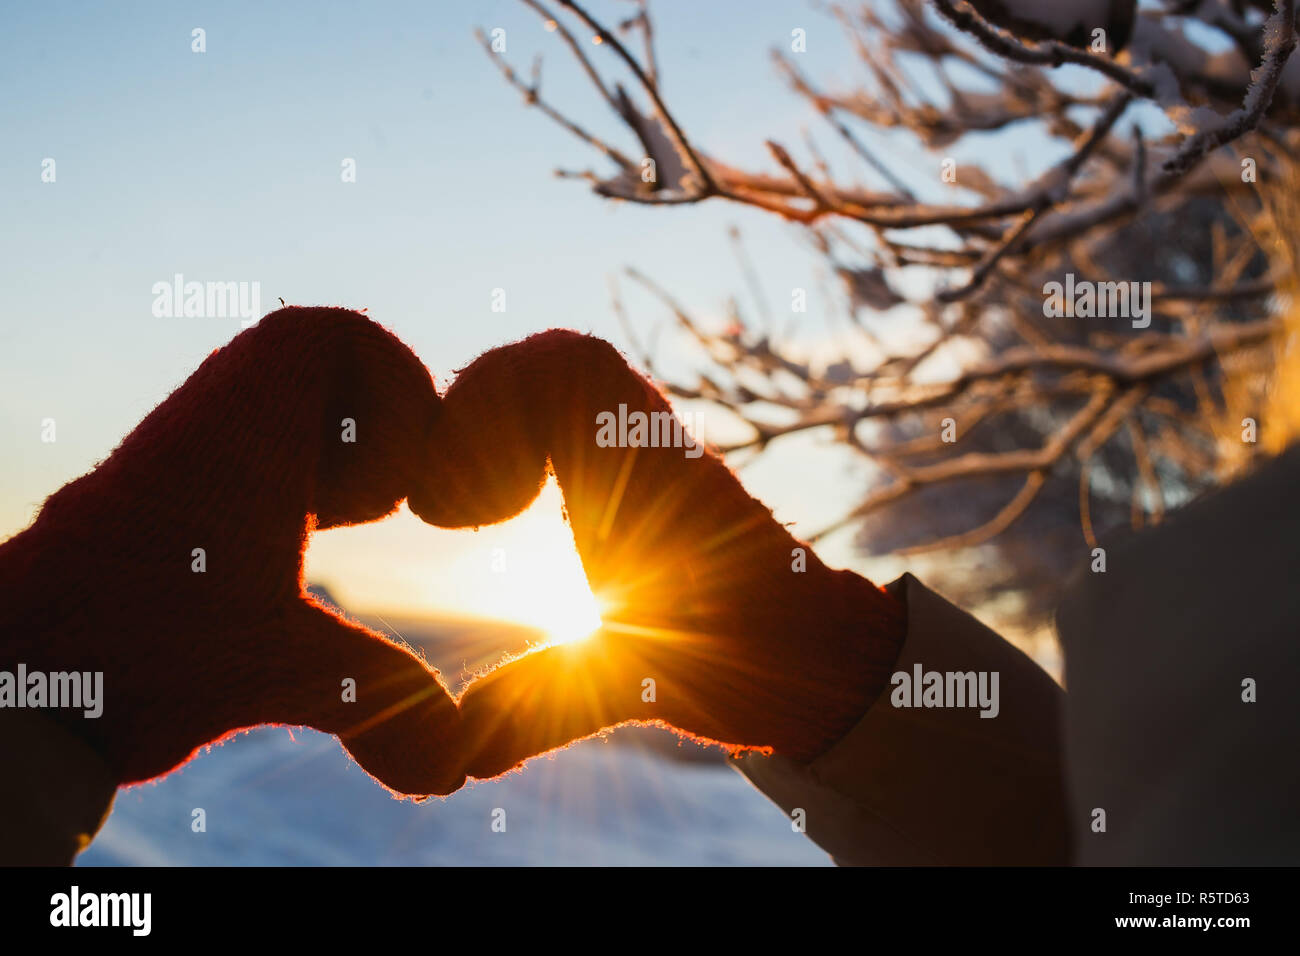 Heart shape symbol of the women mittens in winter frosty sunset. Concept of winter, dating, valentines day and love. Stock Photo